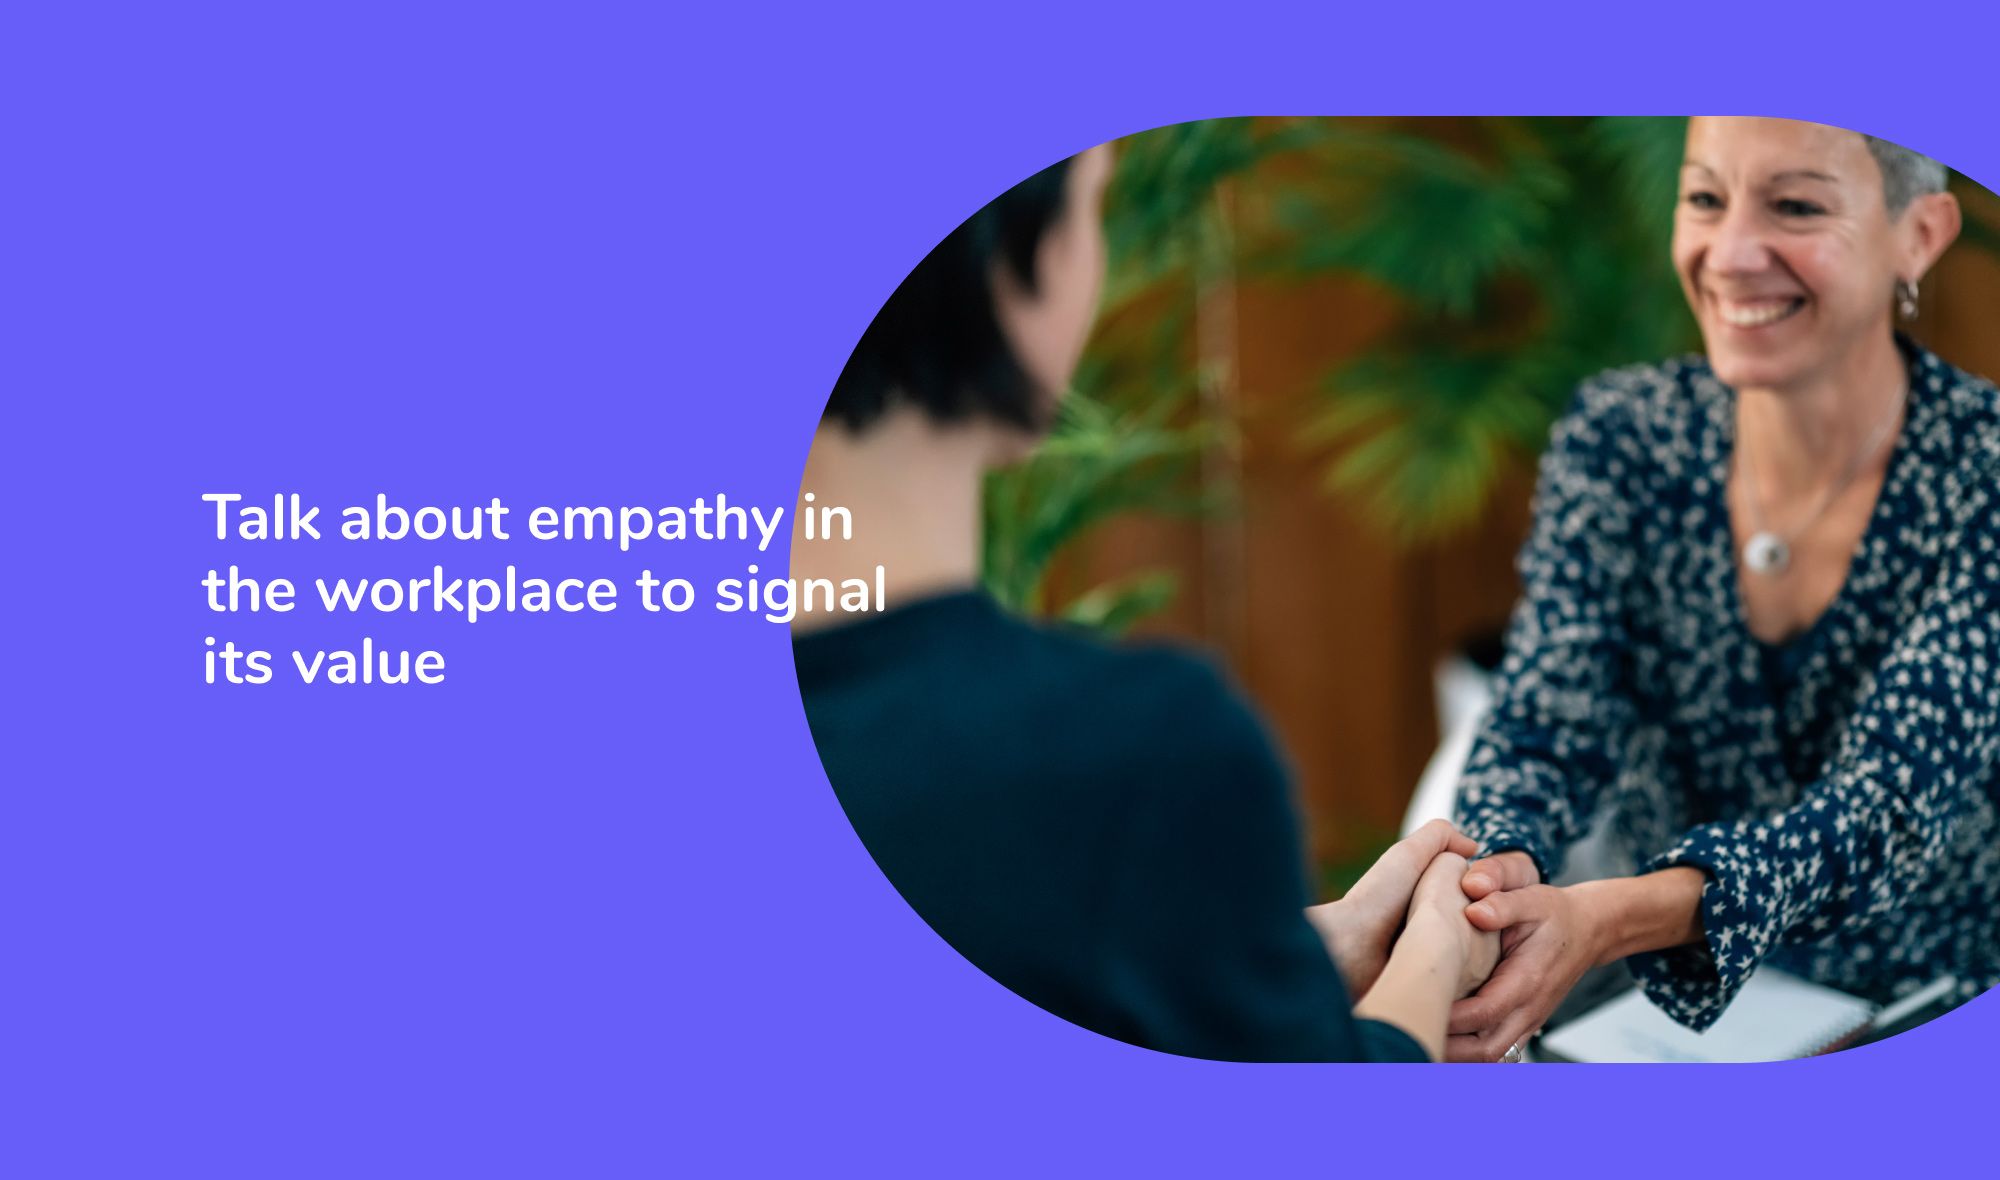 Empathetic leaders: Talk about empathy in the workplace to signal its value